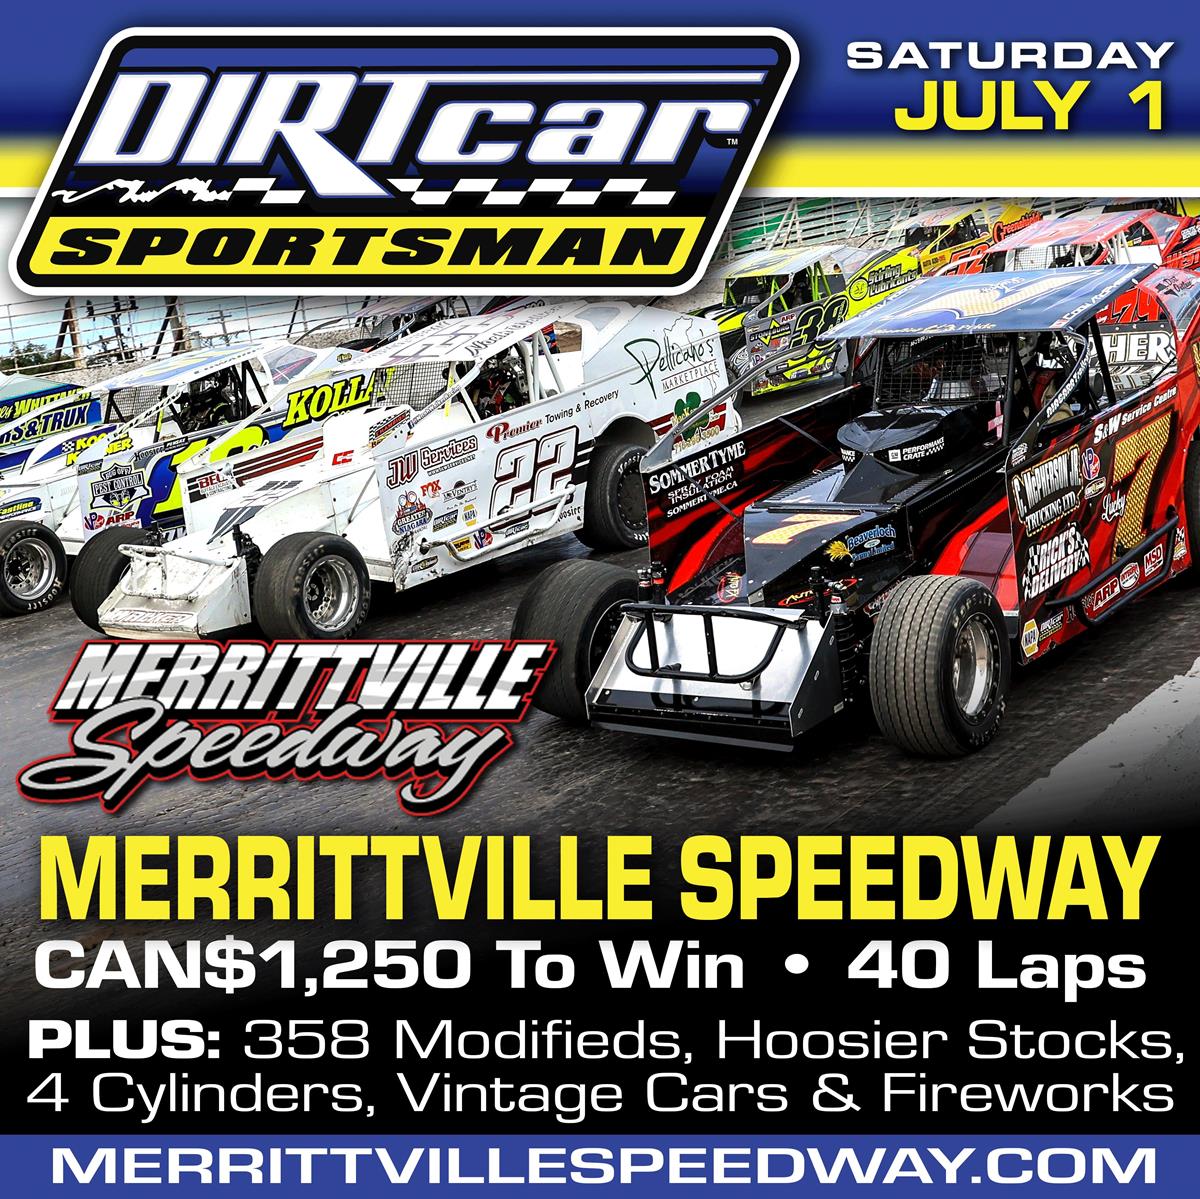 Canada Day Weekend Doubleheader This Weekend at Merrittville